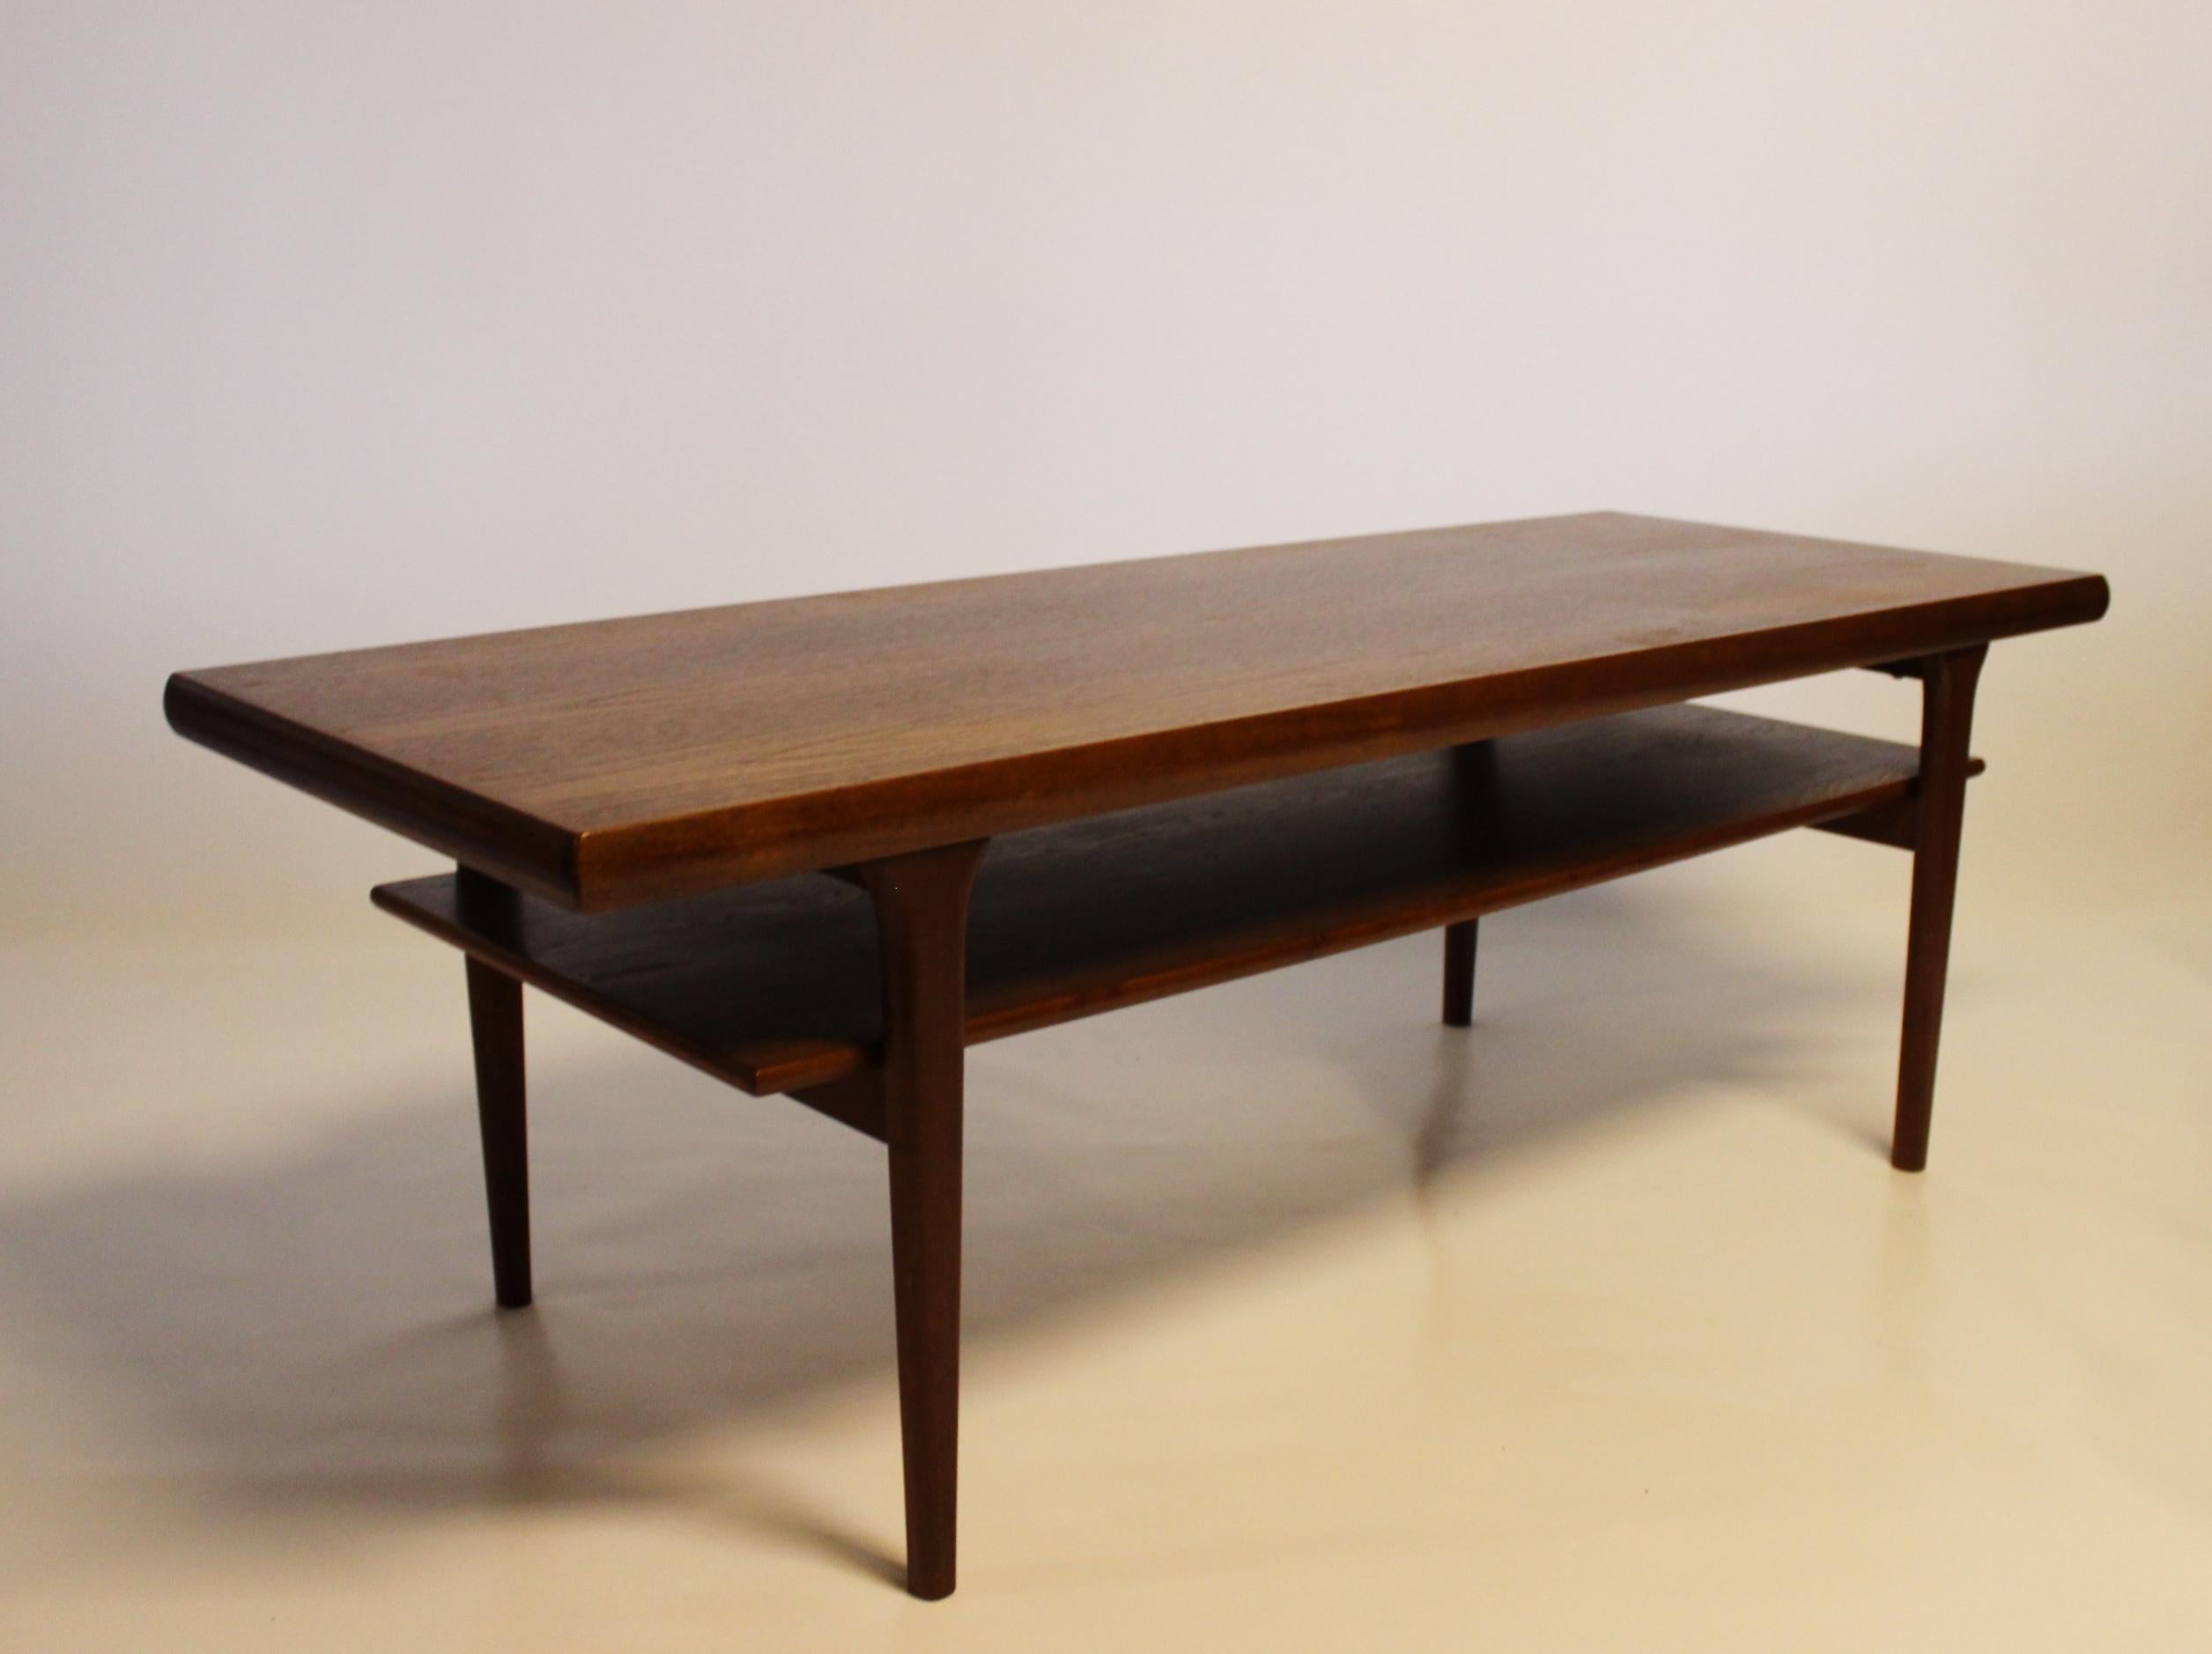 Elegant Coffee Table with Shelf: A stunning exemplar of Danish design from the distinguished 1960s, expertly crafted in teak.

This coffee table stands as an iconic representation of the era's design ethos, characterized by its sleek lines,